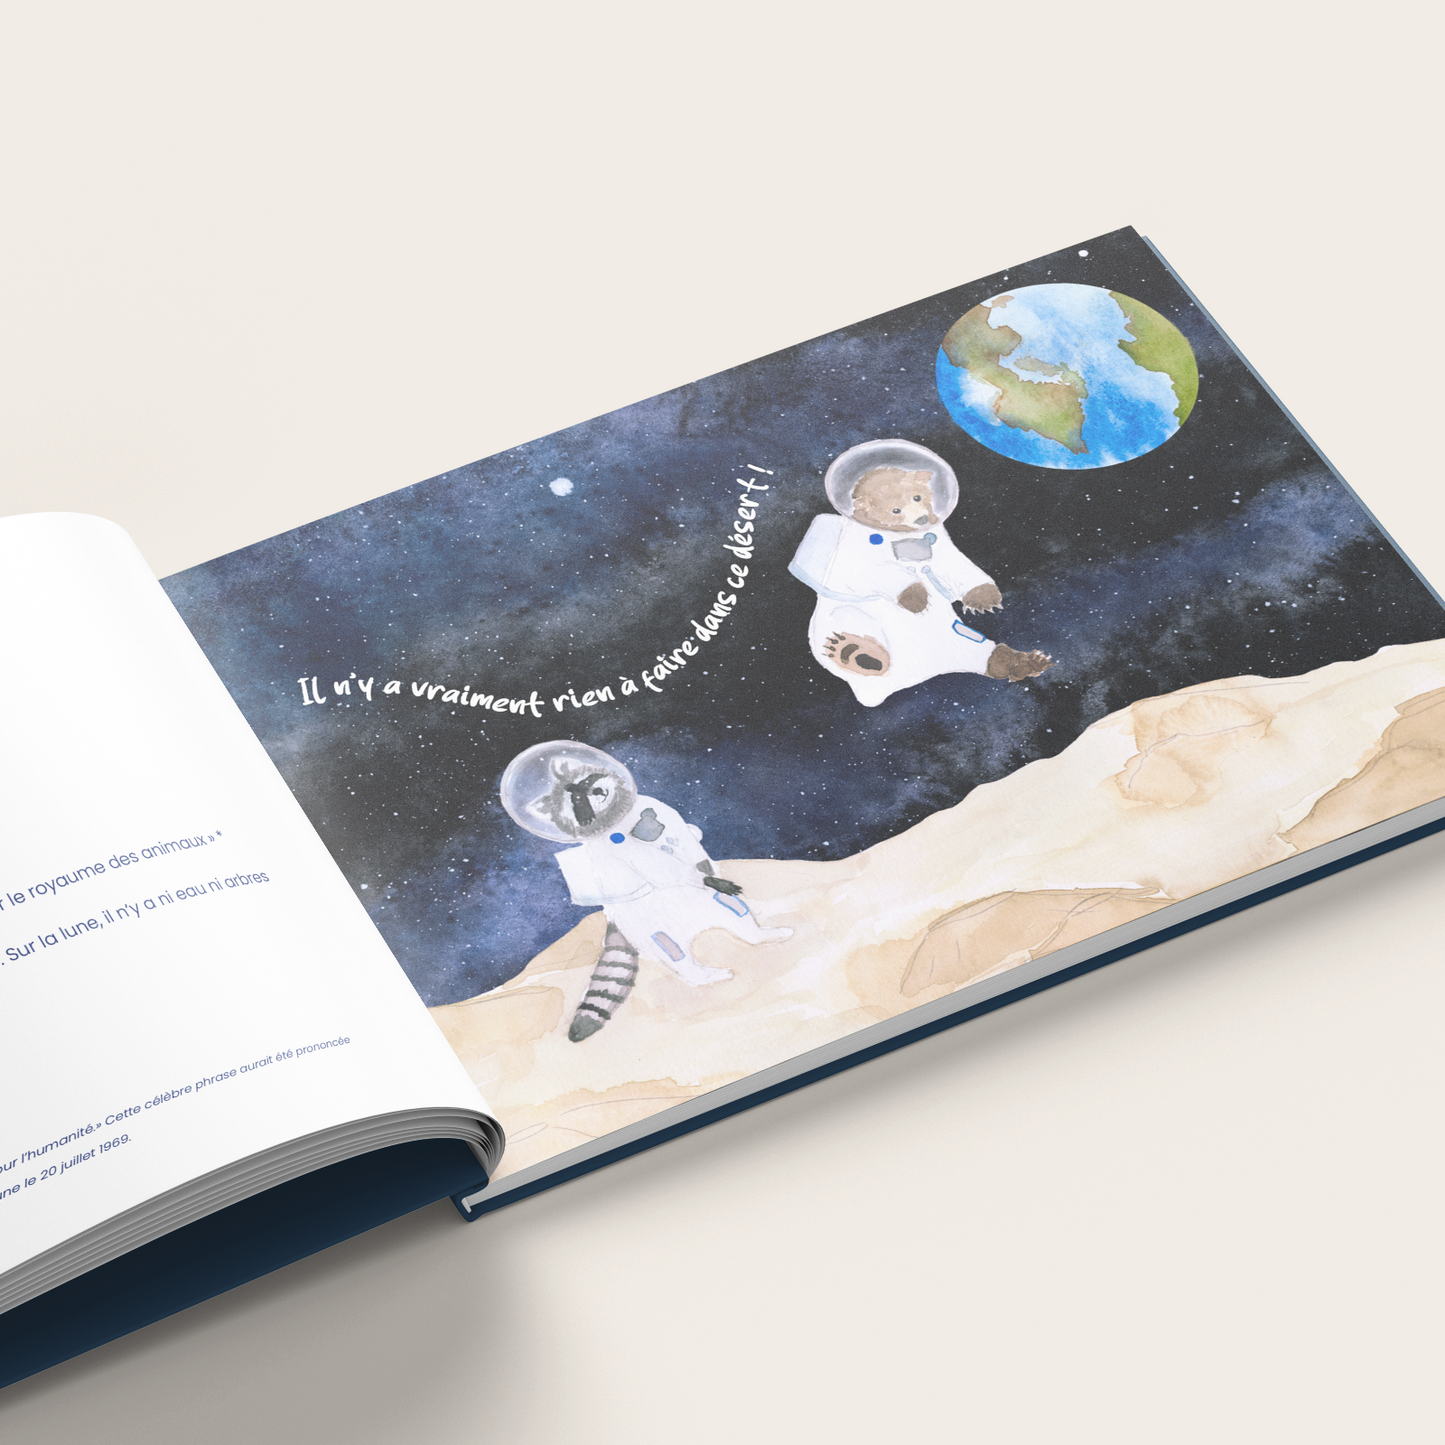 Personalized book - Spatial odyssey